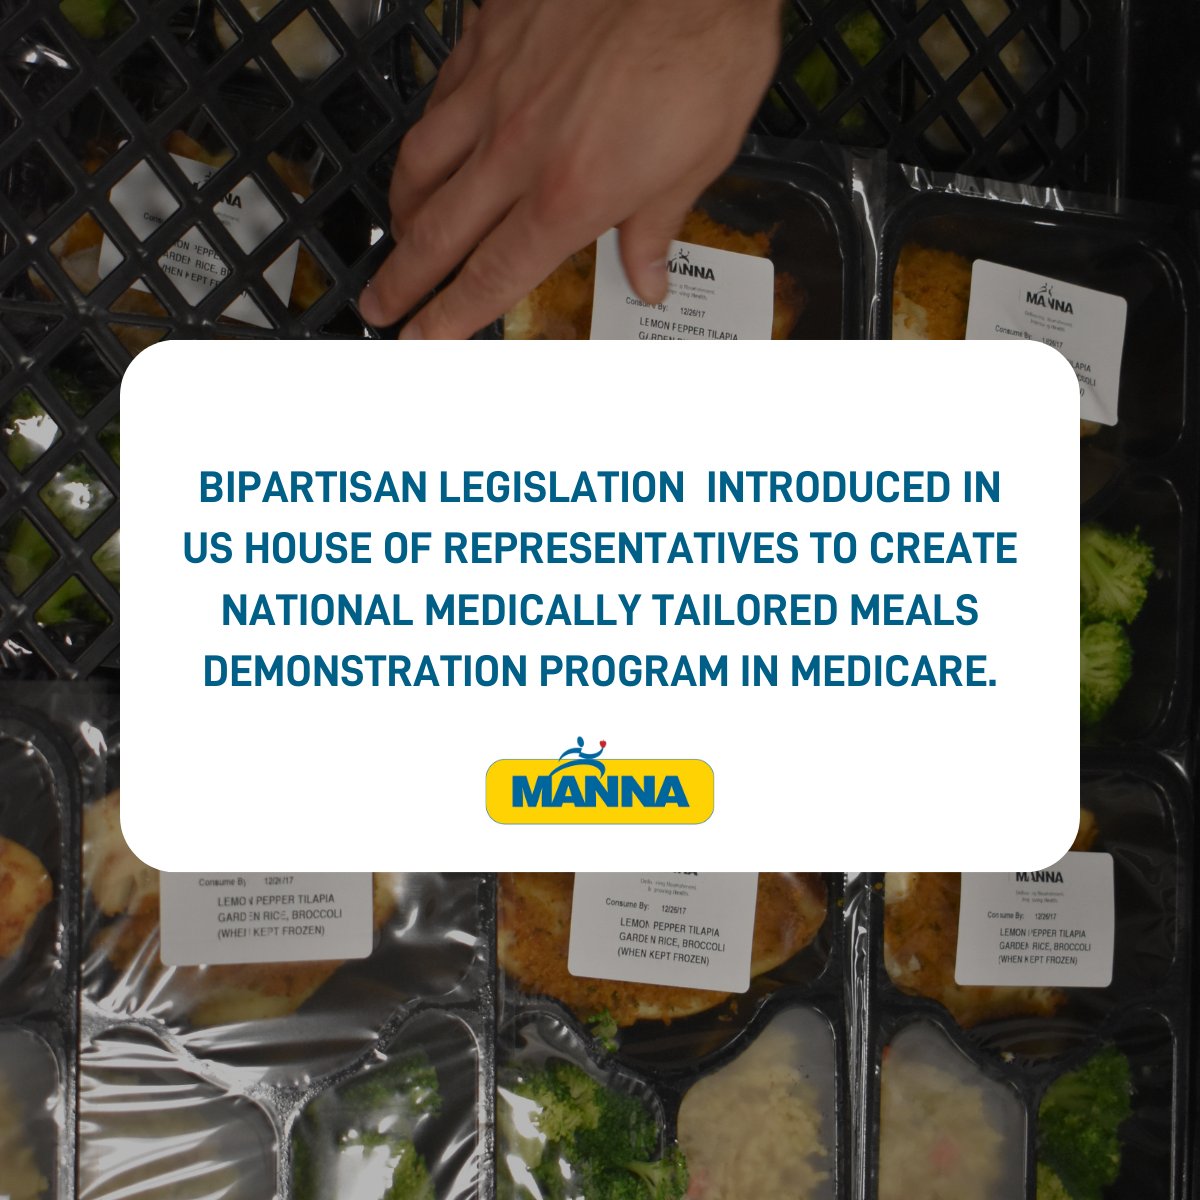 A bipartisan bill establishing the FIRST national MTM demo program in Medicare was just introduced. It would give seniors w/ critical illness access to medically-tailored, home delivered-meals. Thank you: @RepMcGovern @RepMalliotakis @chelliepingree @repbrianfitz @RepDwightEvans!